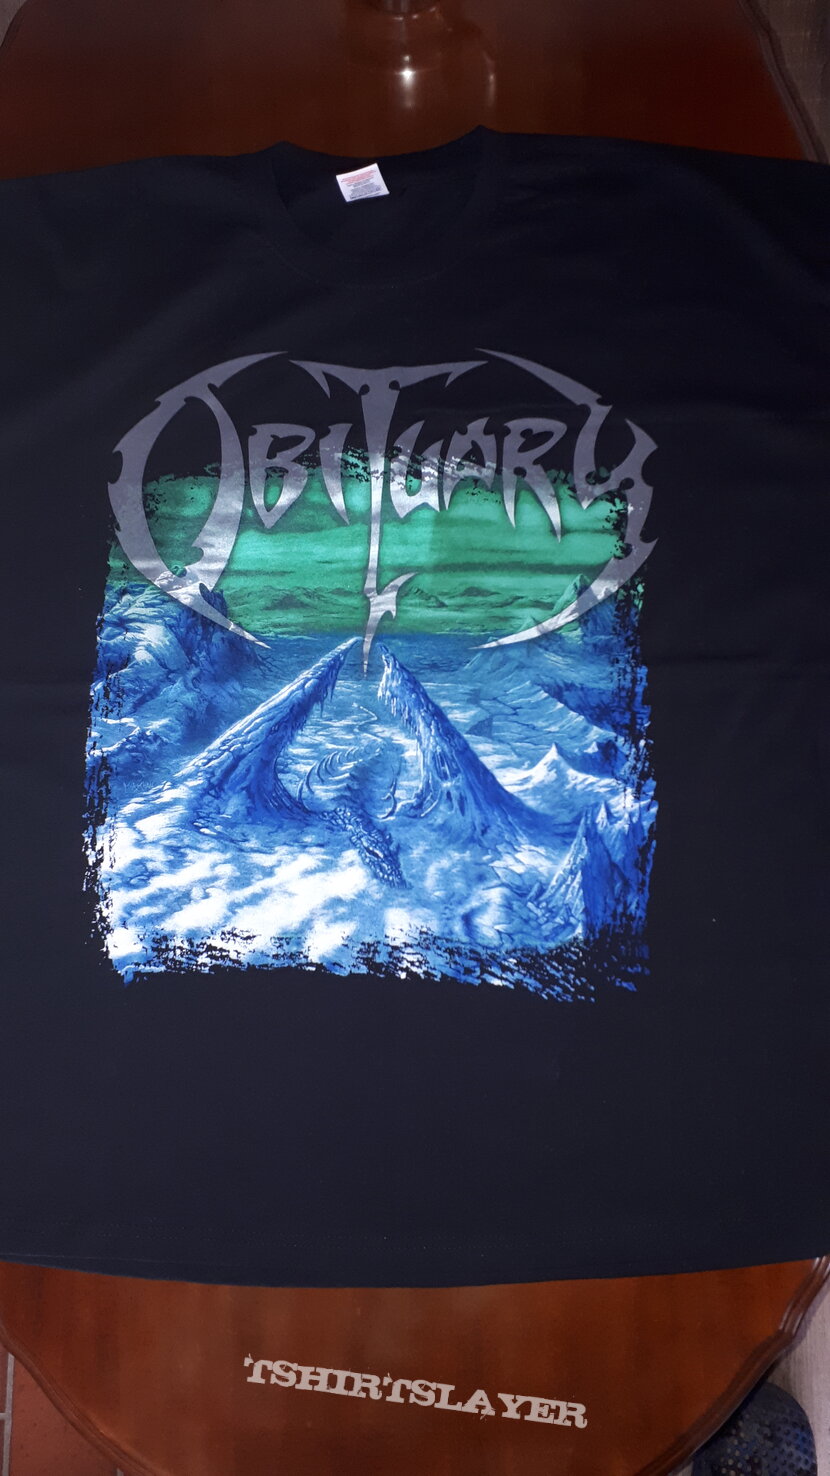 Obituary- Frozen In Time Tour 2006 TS